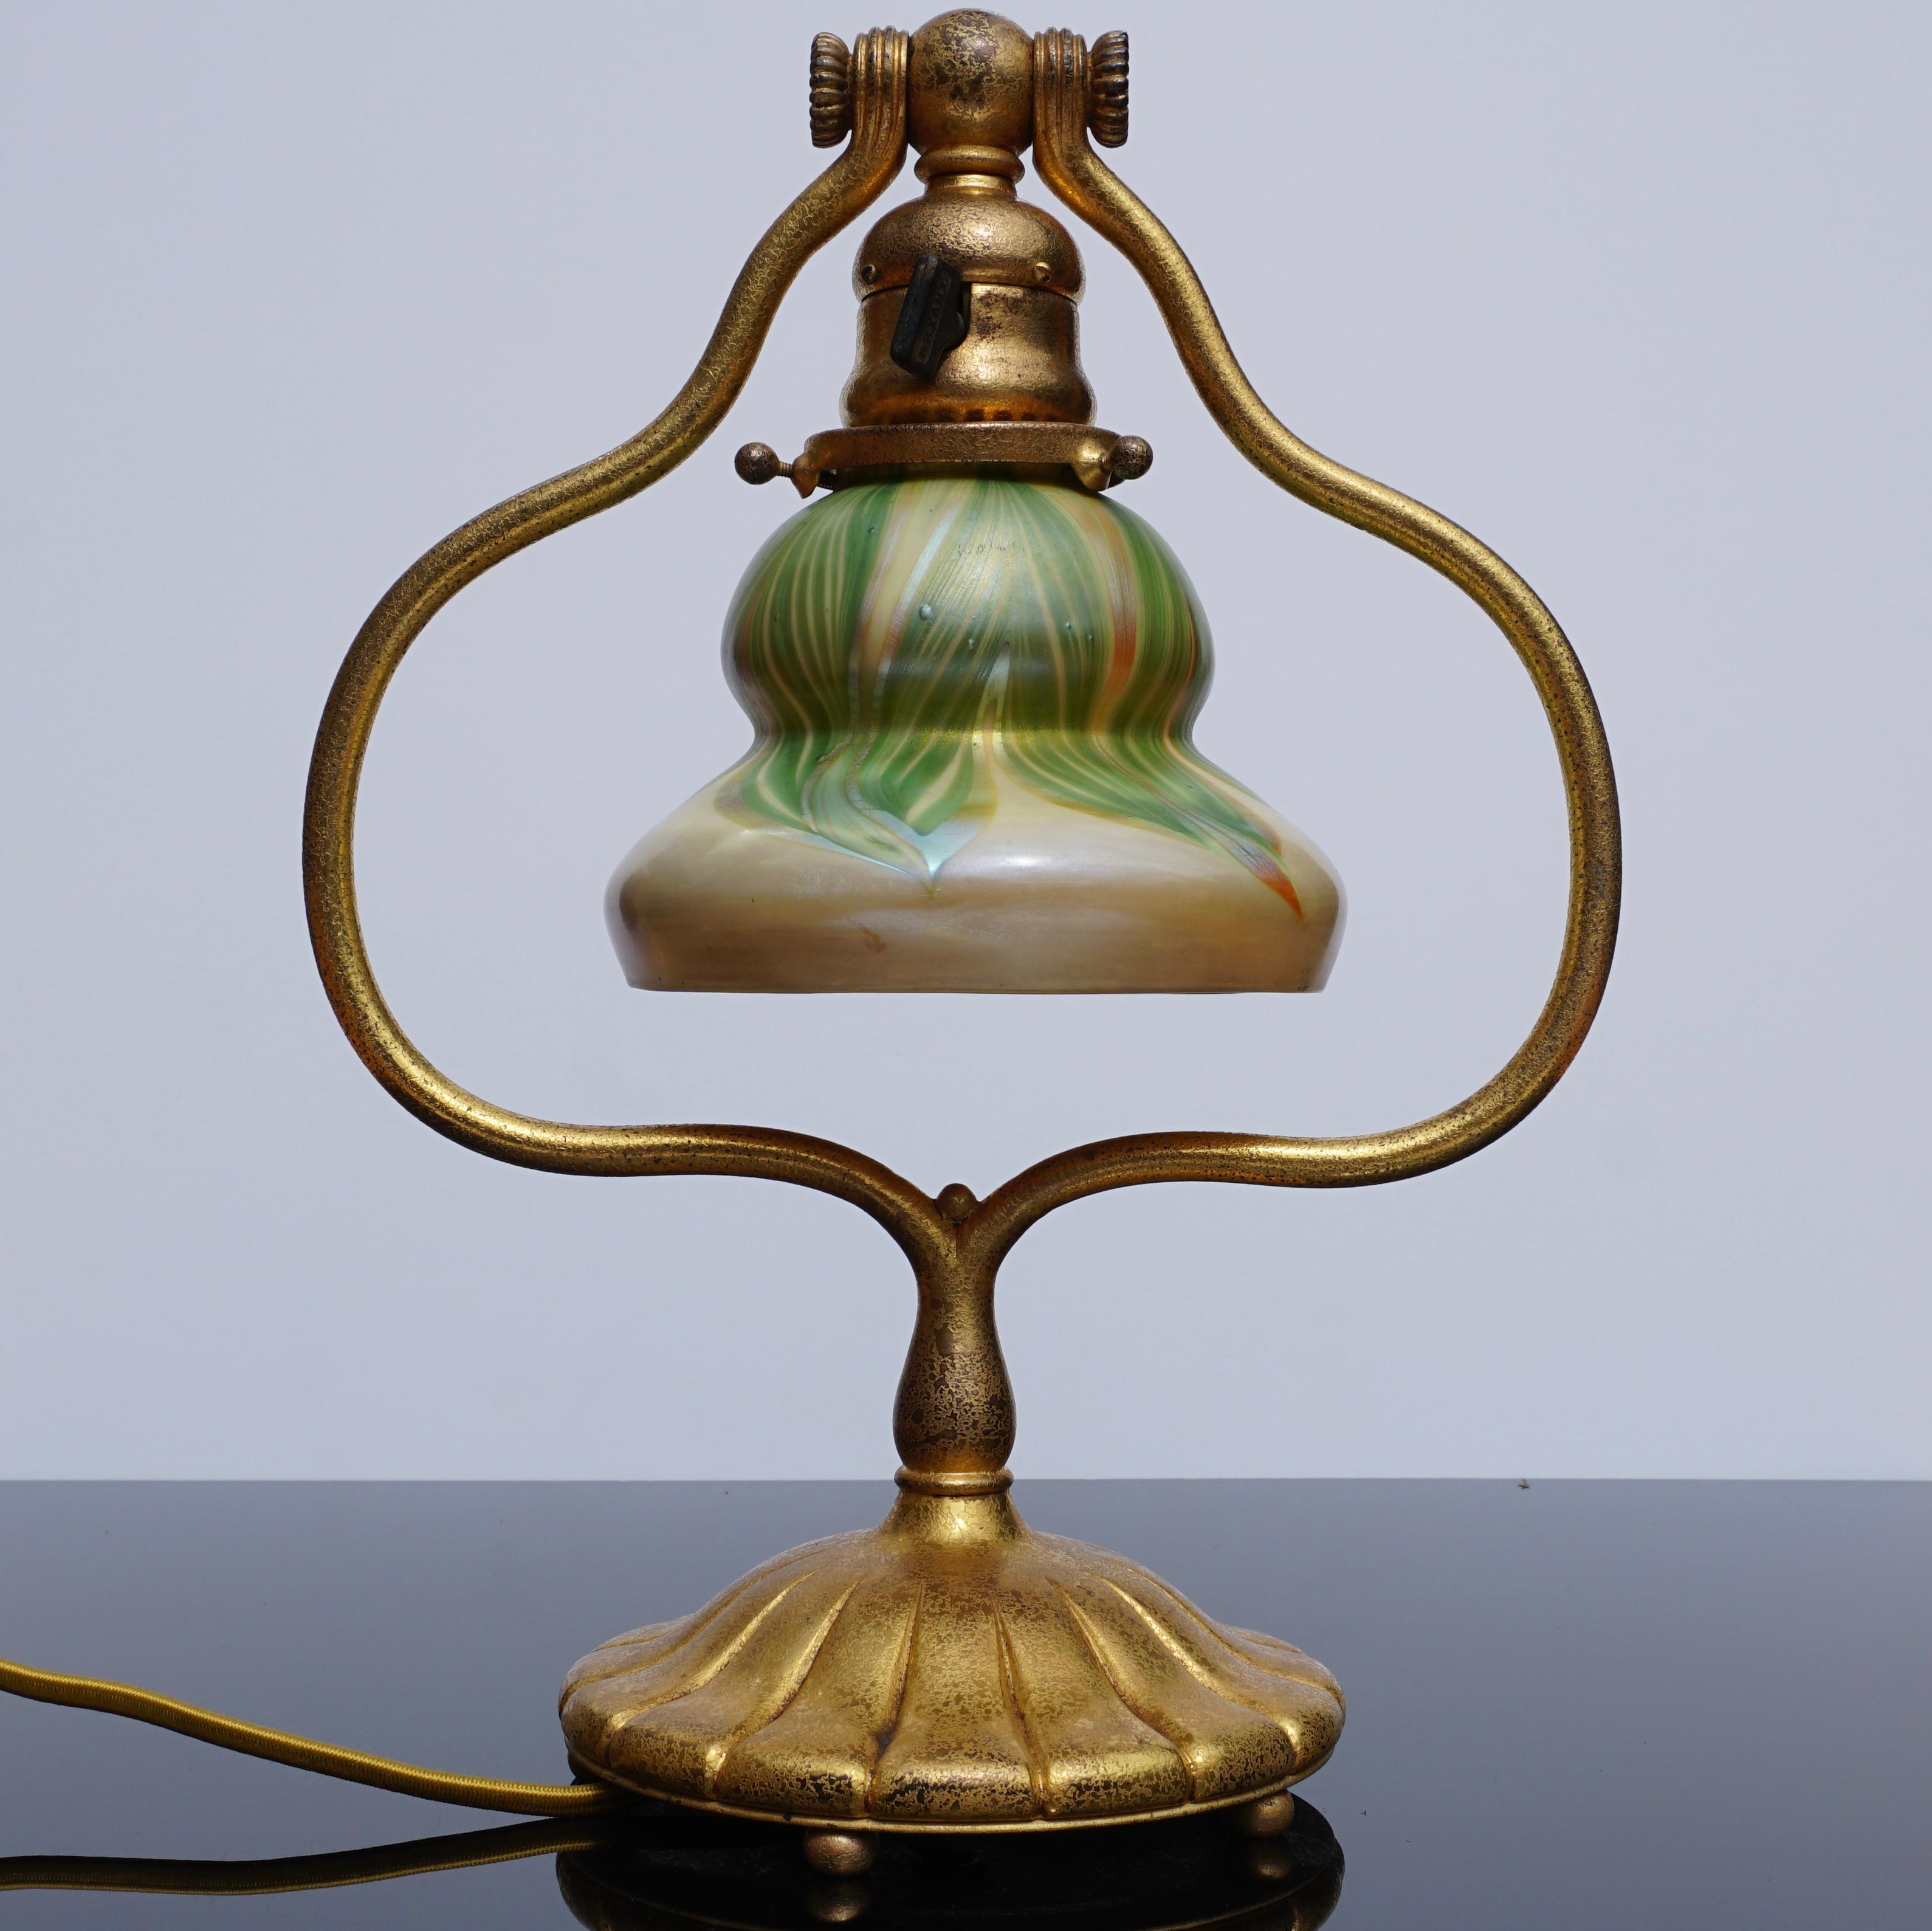 A delightful Tiffany Studios New York 419 bronze harp Art Nouveau table or desk lamp with a stunning L.C.T signed pull feathered favrile and gold iridescent glass shade. The bronze base with textured gilt gold patina. This lamp has no issues and is